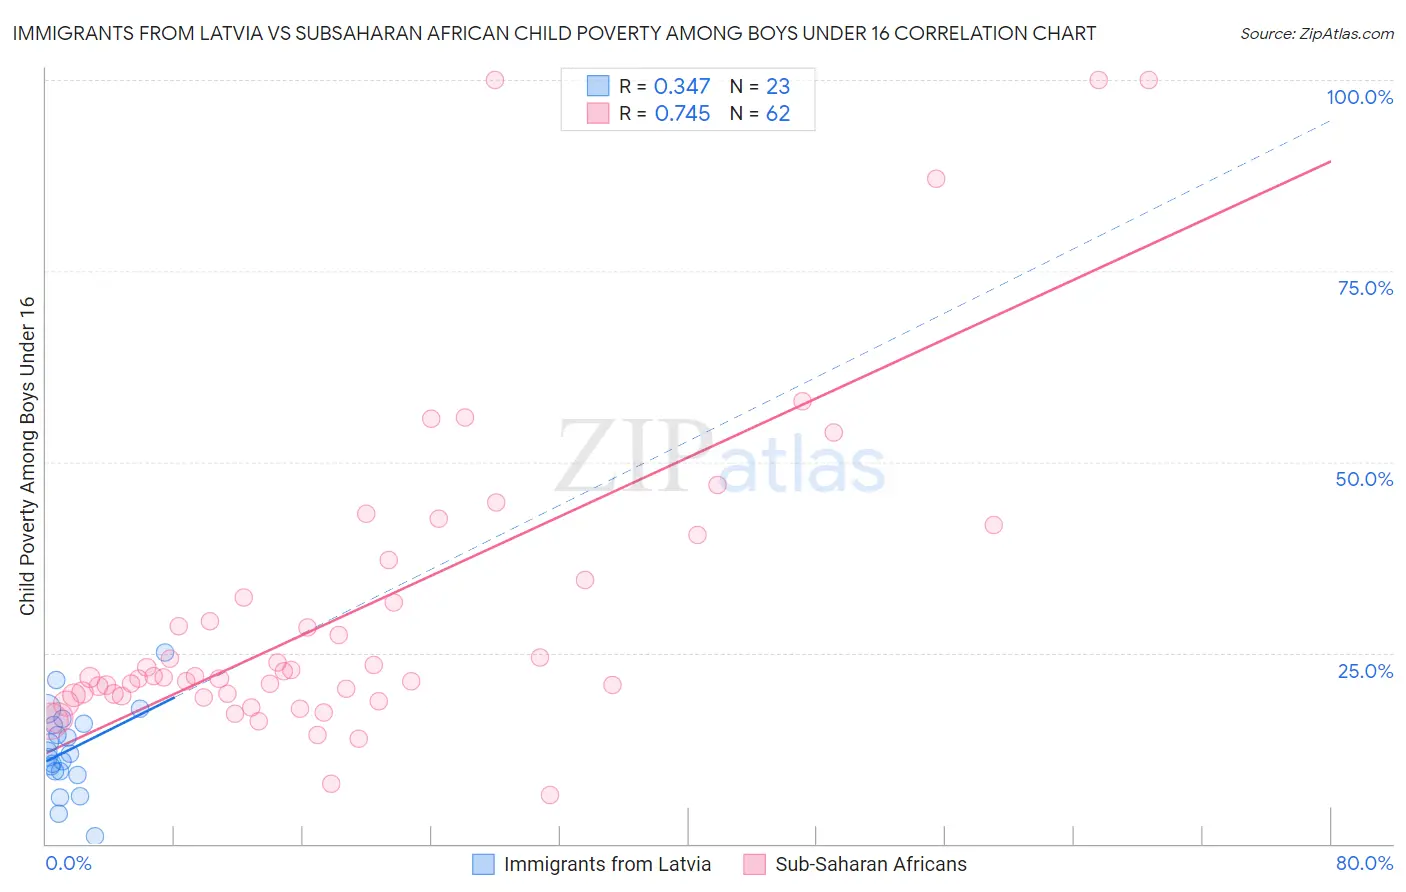 Immigrants from Latvia vs Subsaharan African Child Poverty Among Boys Under 16